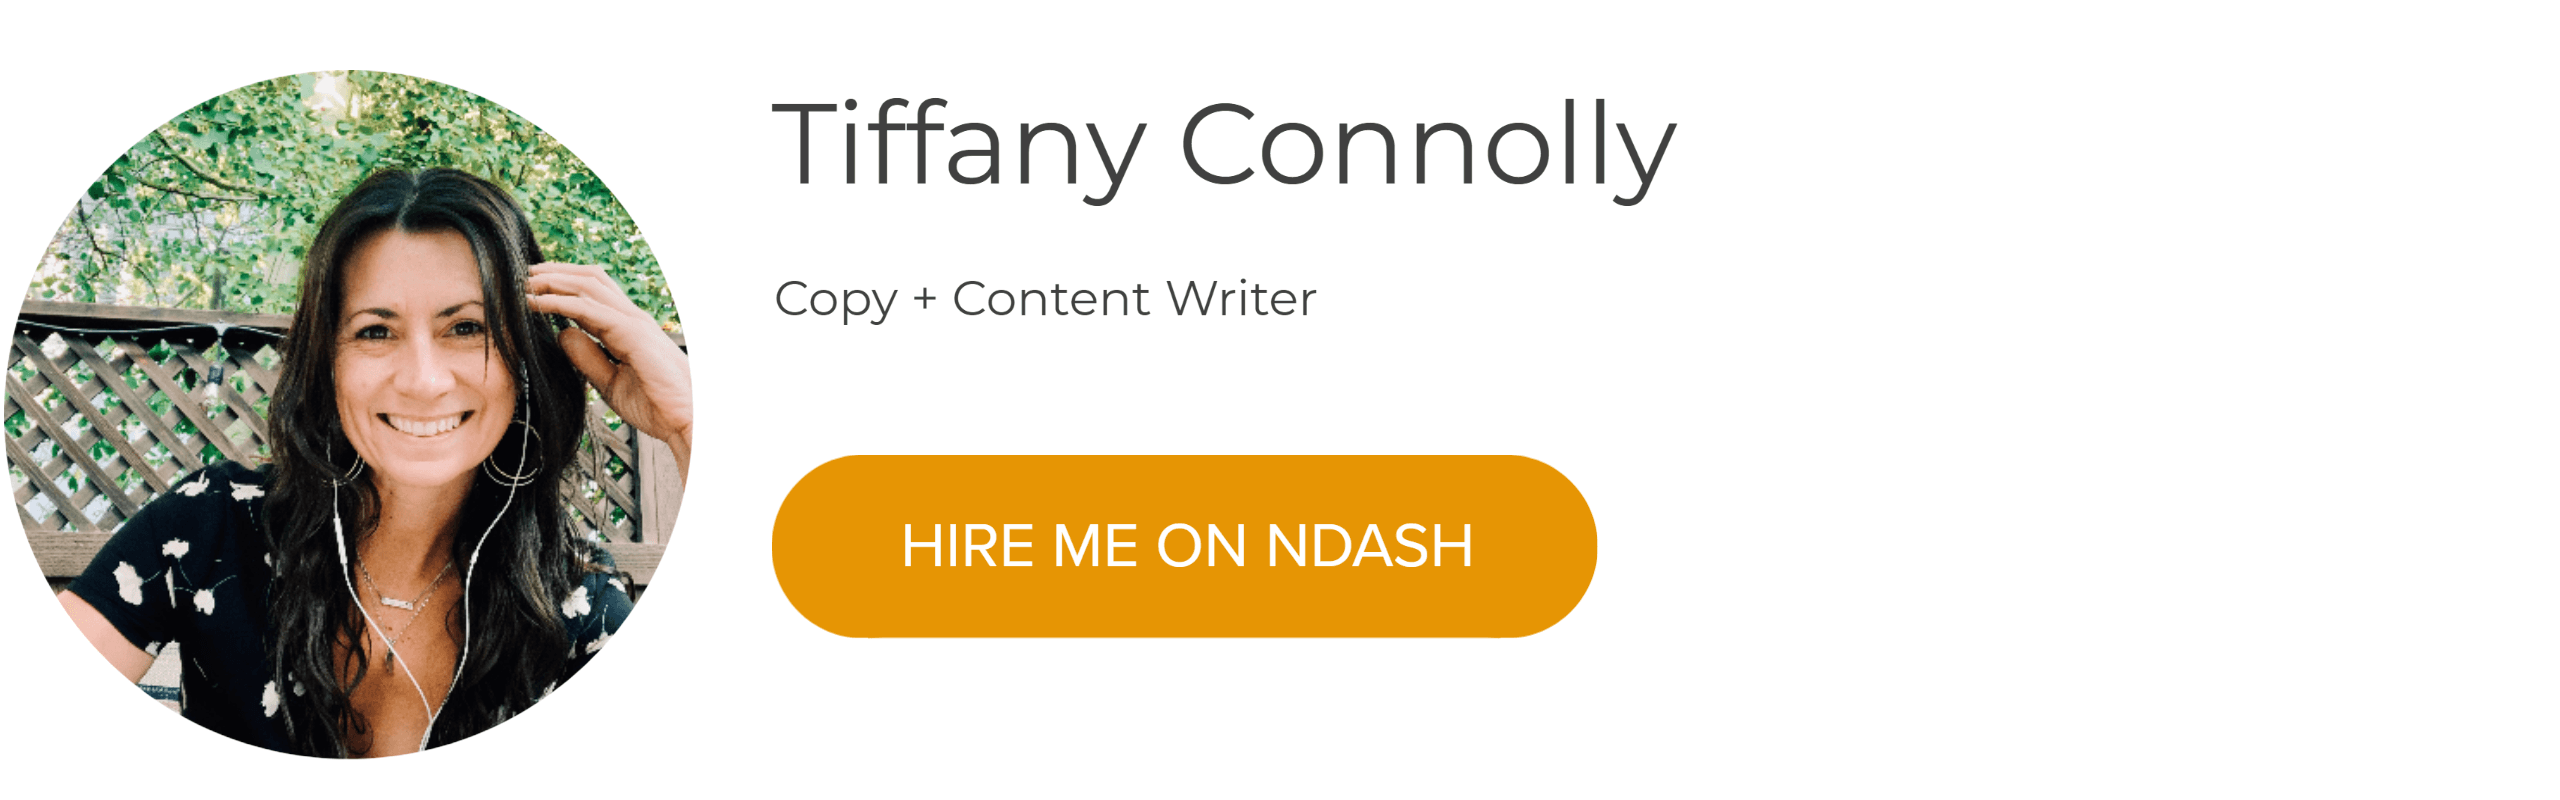 tiffany connolly, copy + content writer and sustainability expert